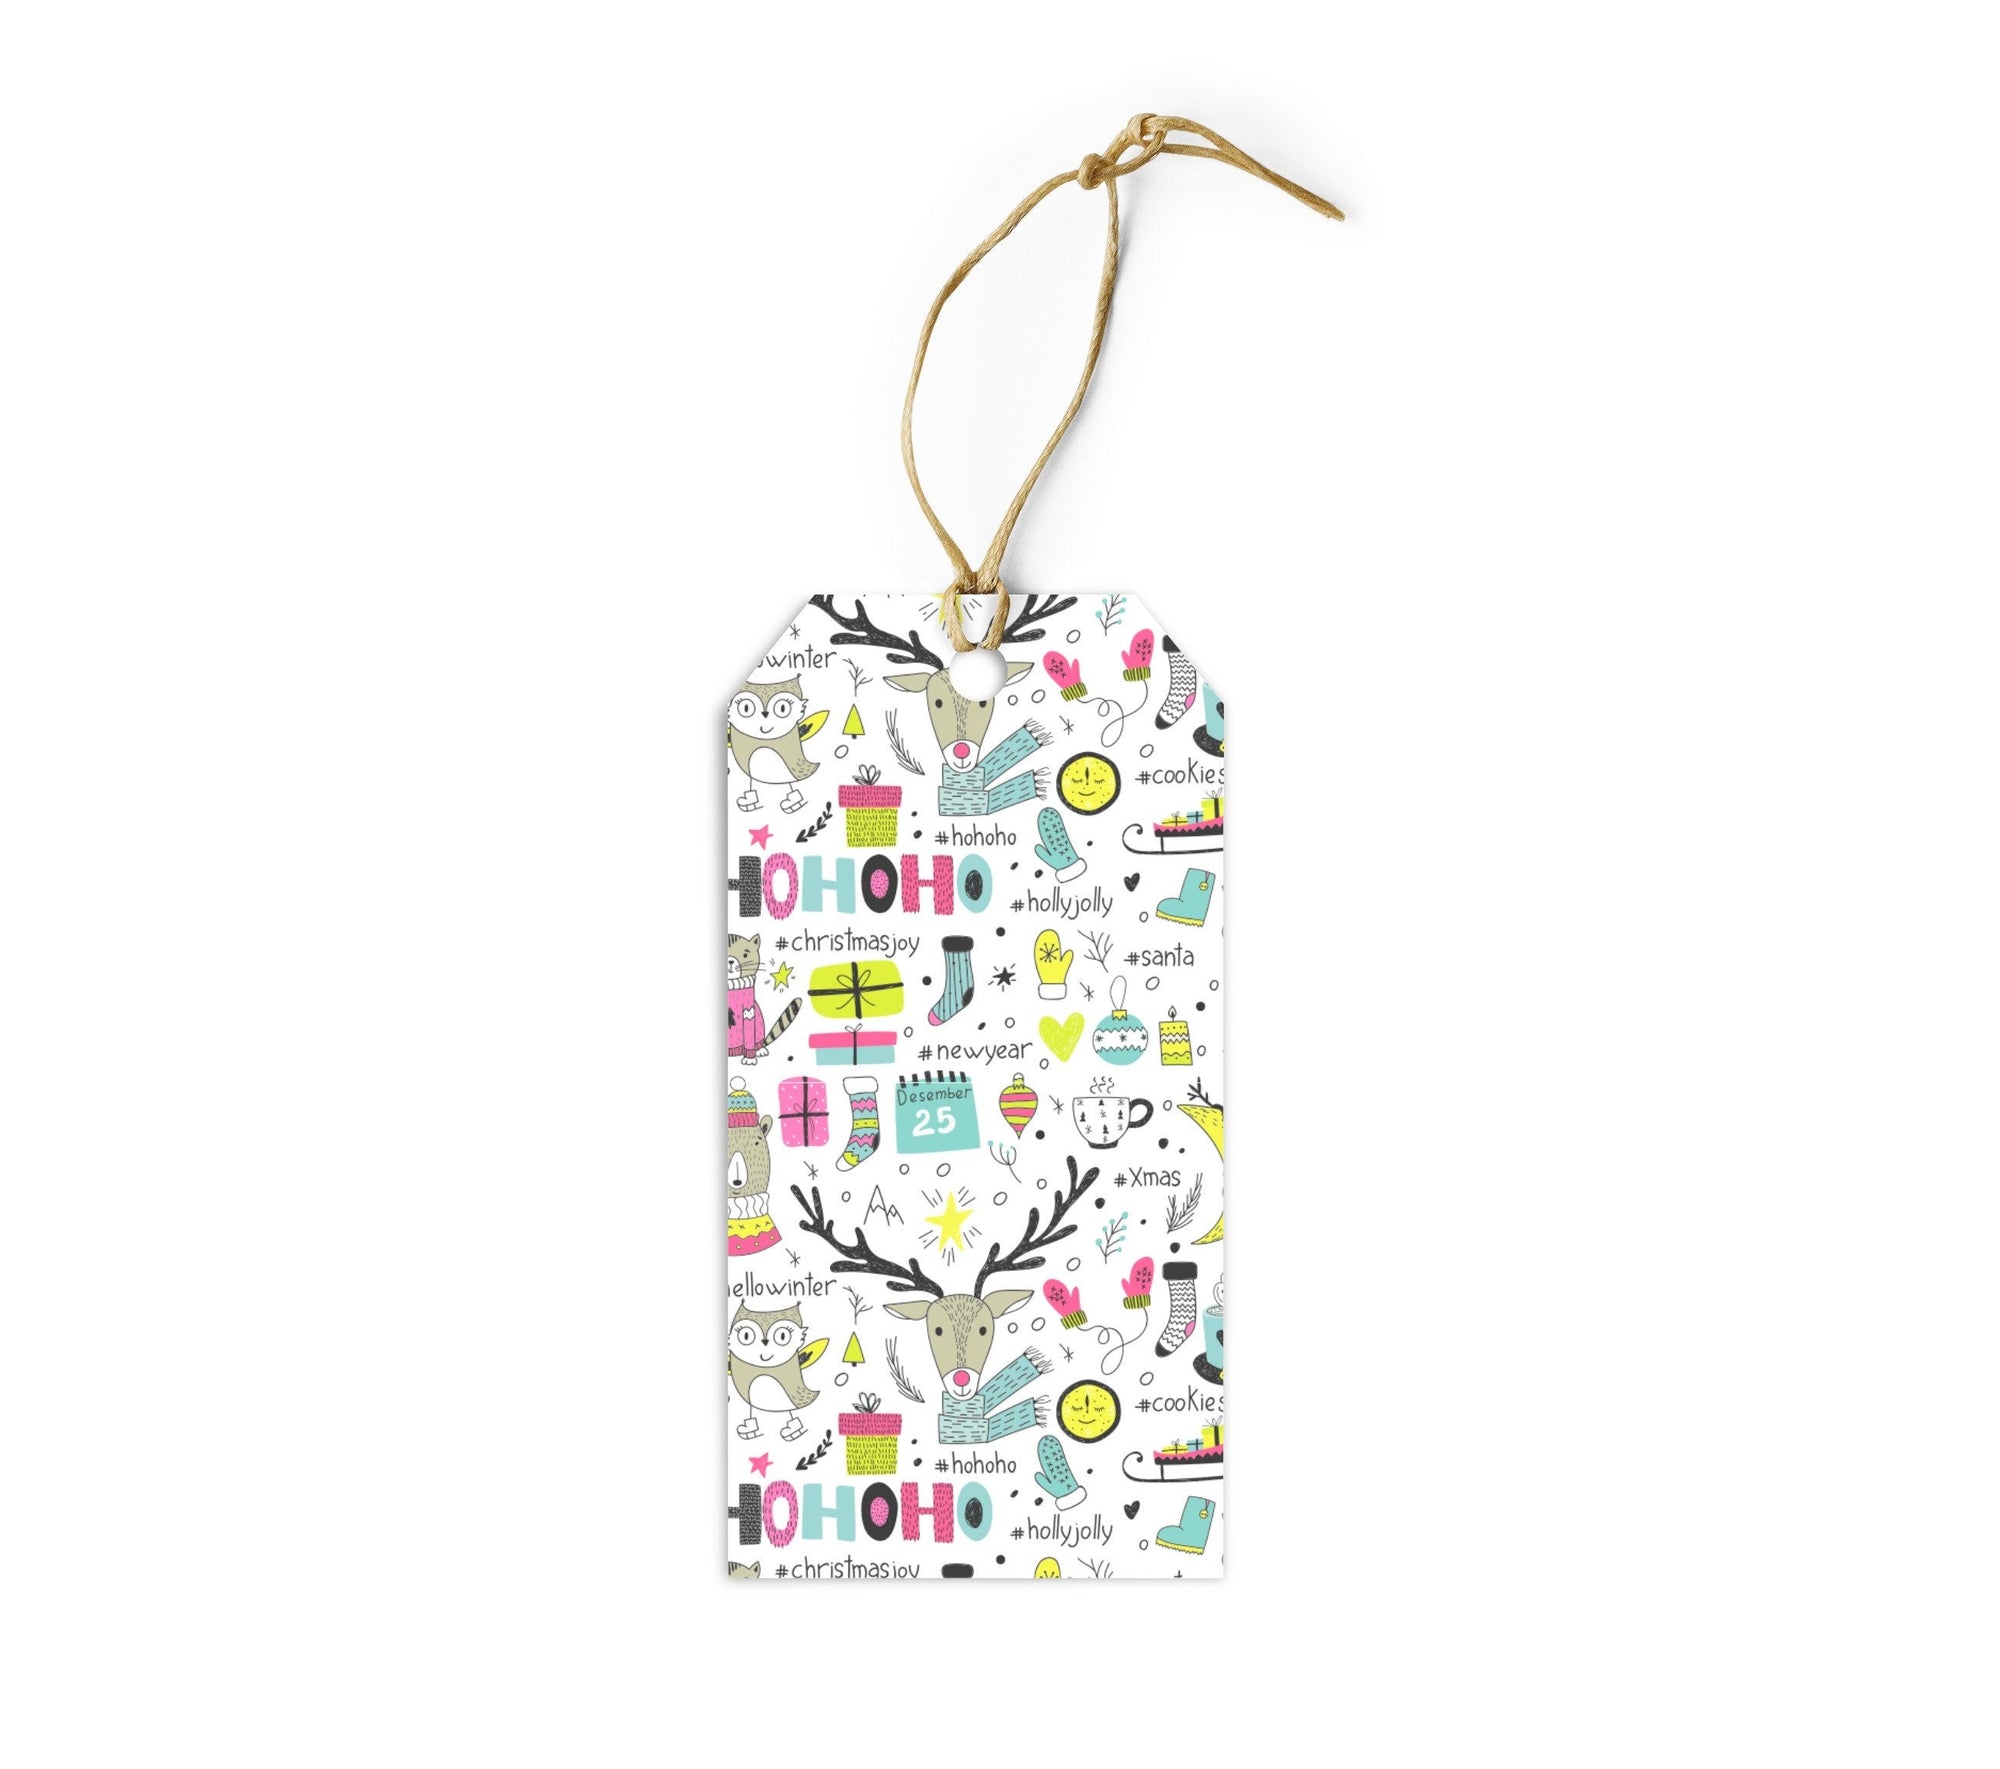 Boho Christmas Animals Gift Tags - Set of 10 Gift Tags &amp; Labels Violagrace-174 